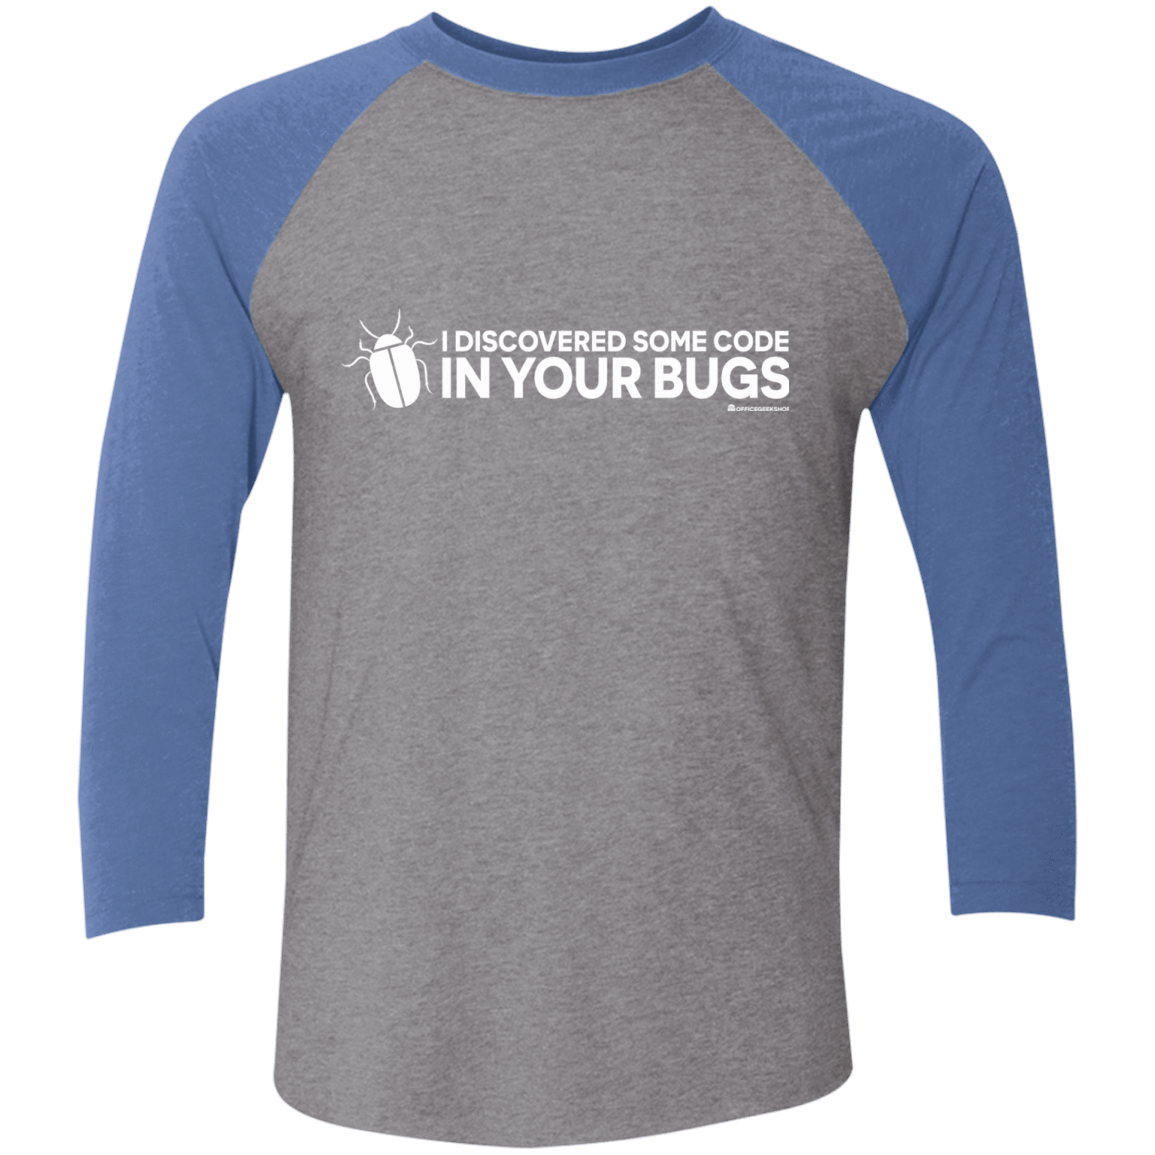 T-Shirts Premium Heather/Vintage Royal / X-Small I Discovered Some Code In Your Bugs Men's Triblend 3/4 Sleeve